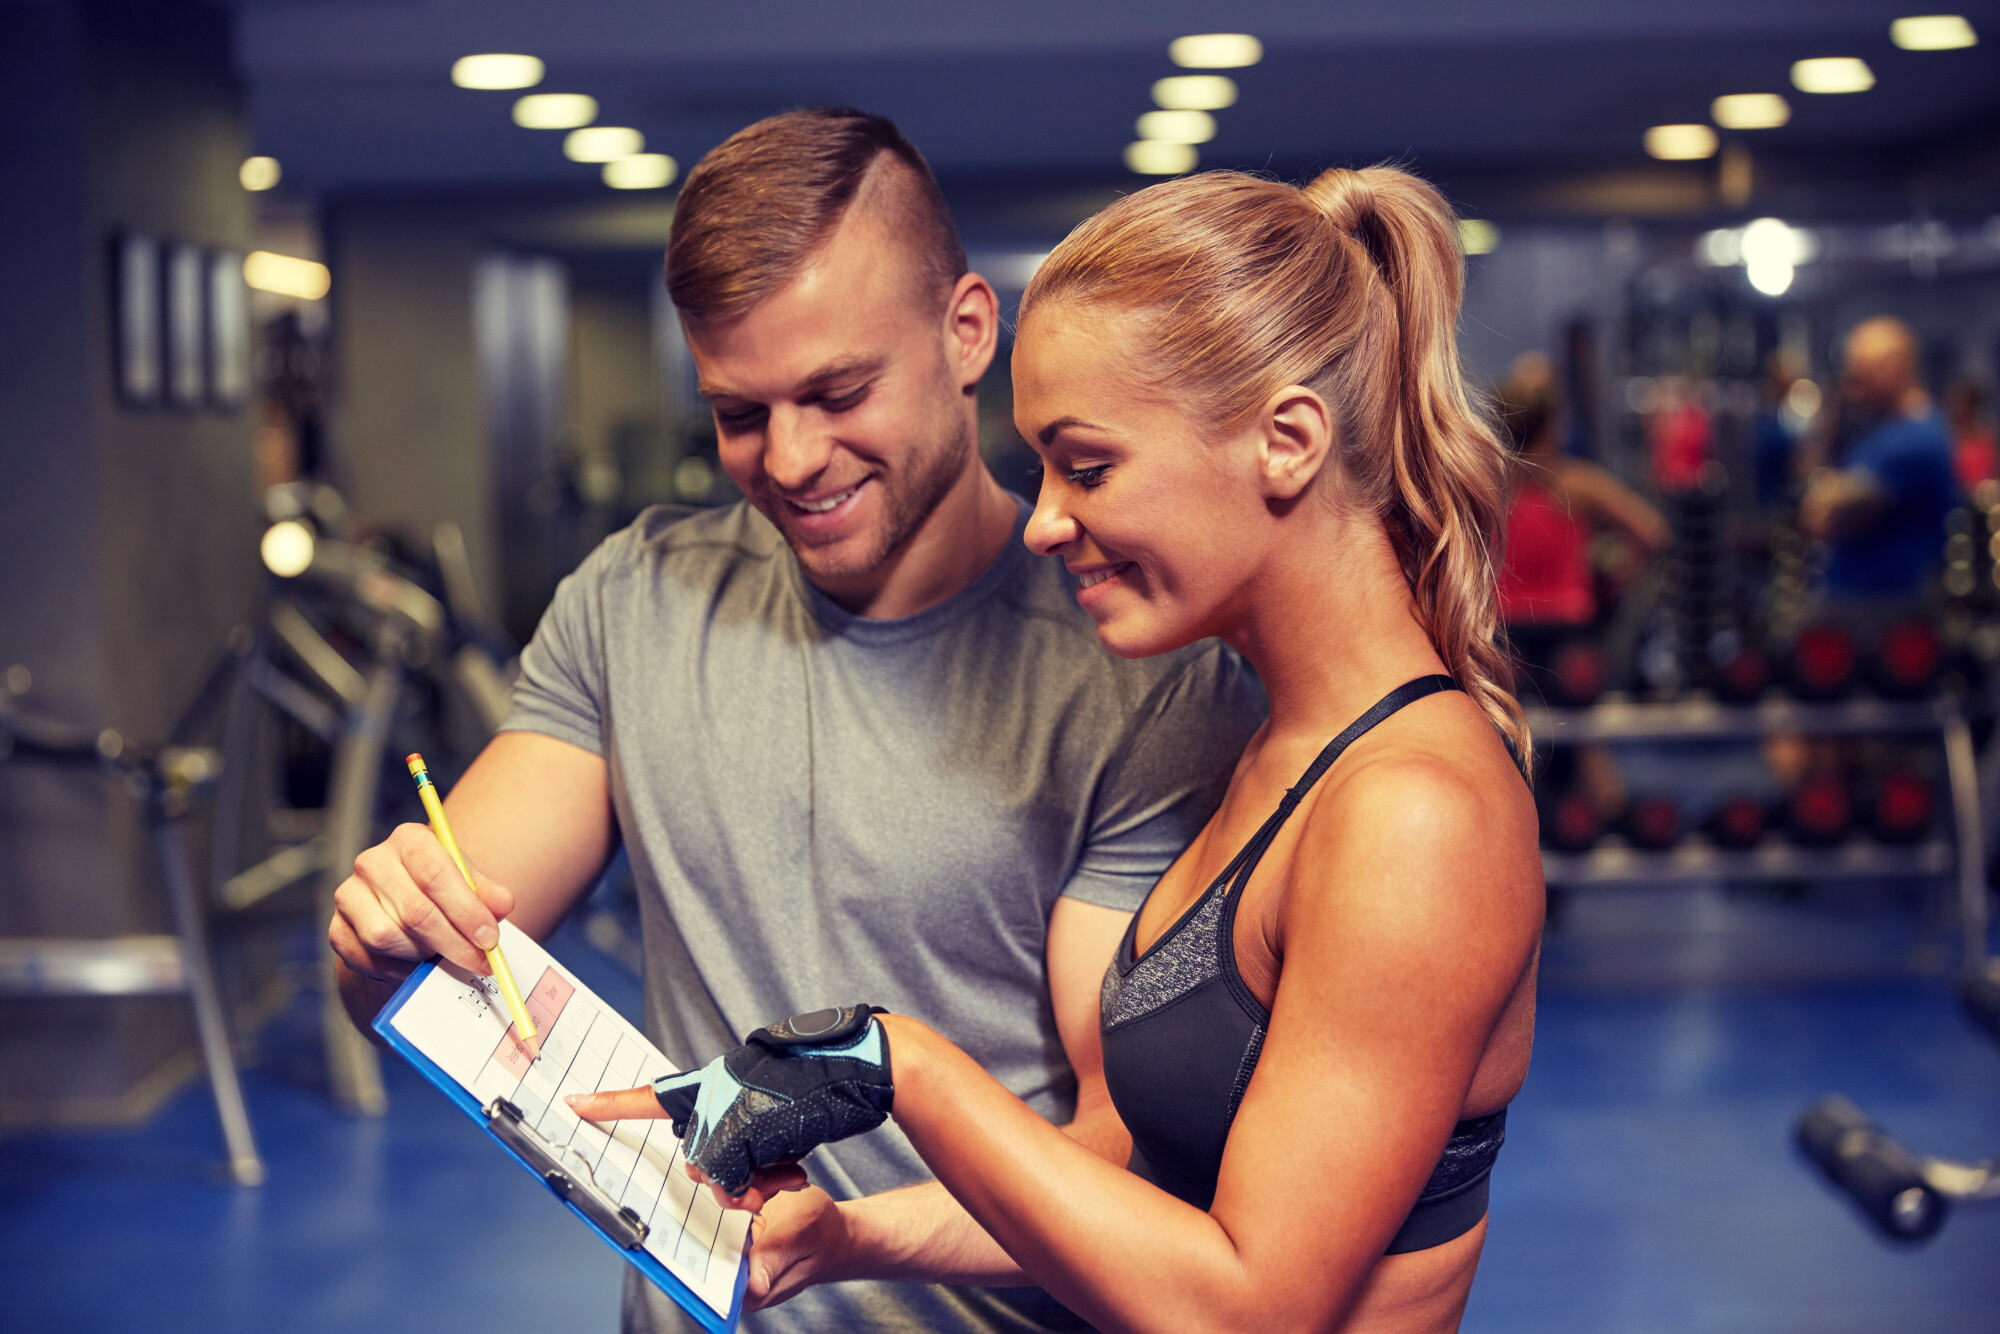 Clients always want their own personal trainers around for live fitness instruction. Here's why they keep booking appointments.